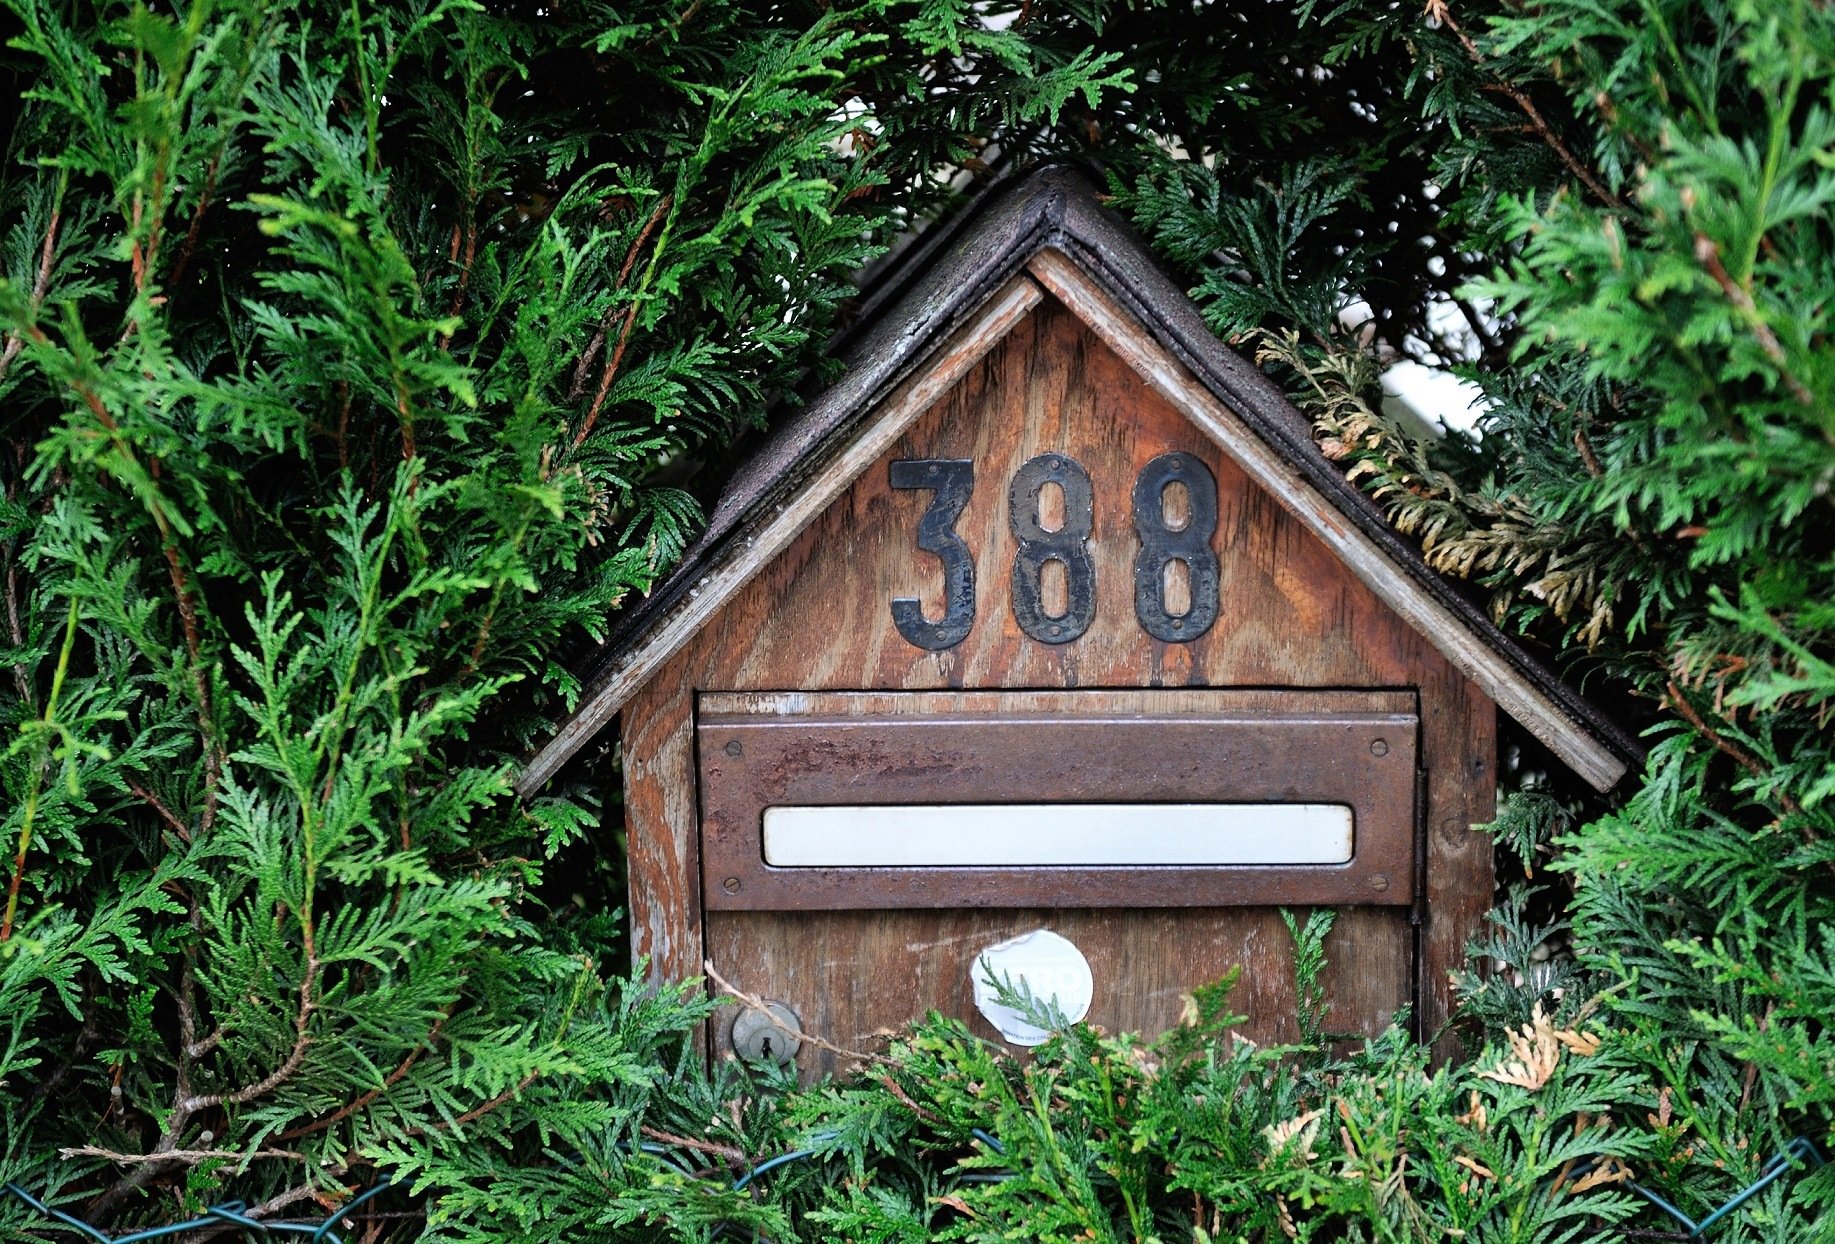 Wooden mailbox with numbers